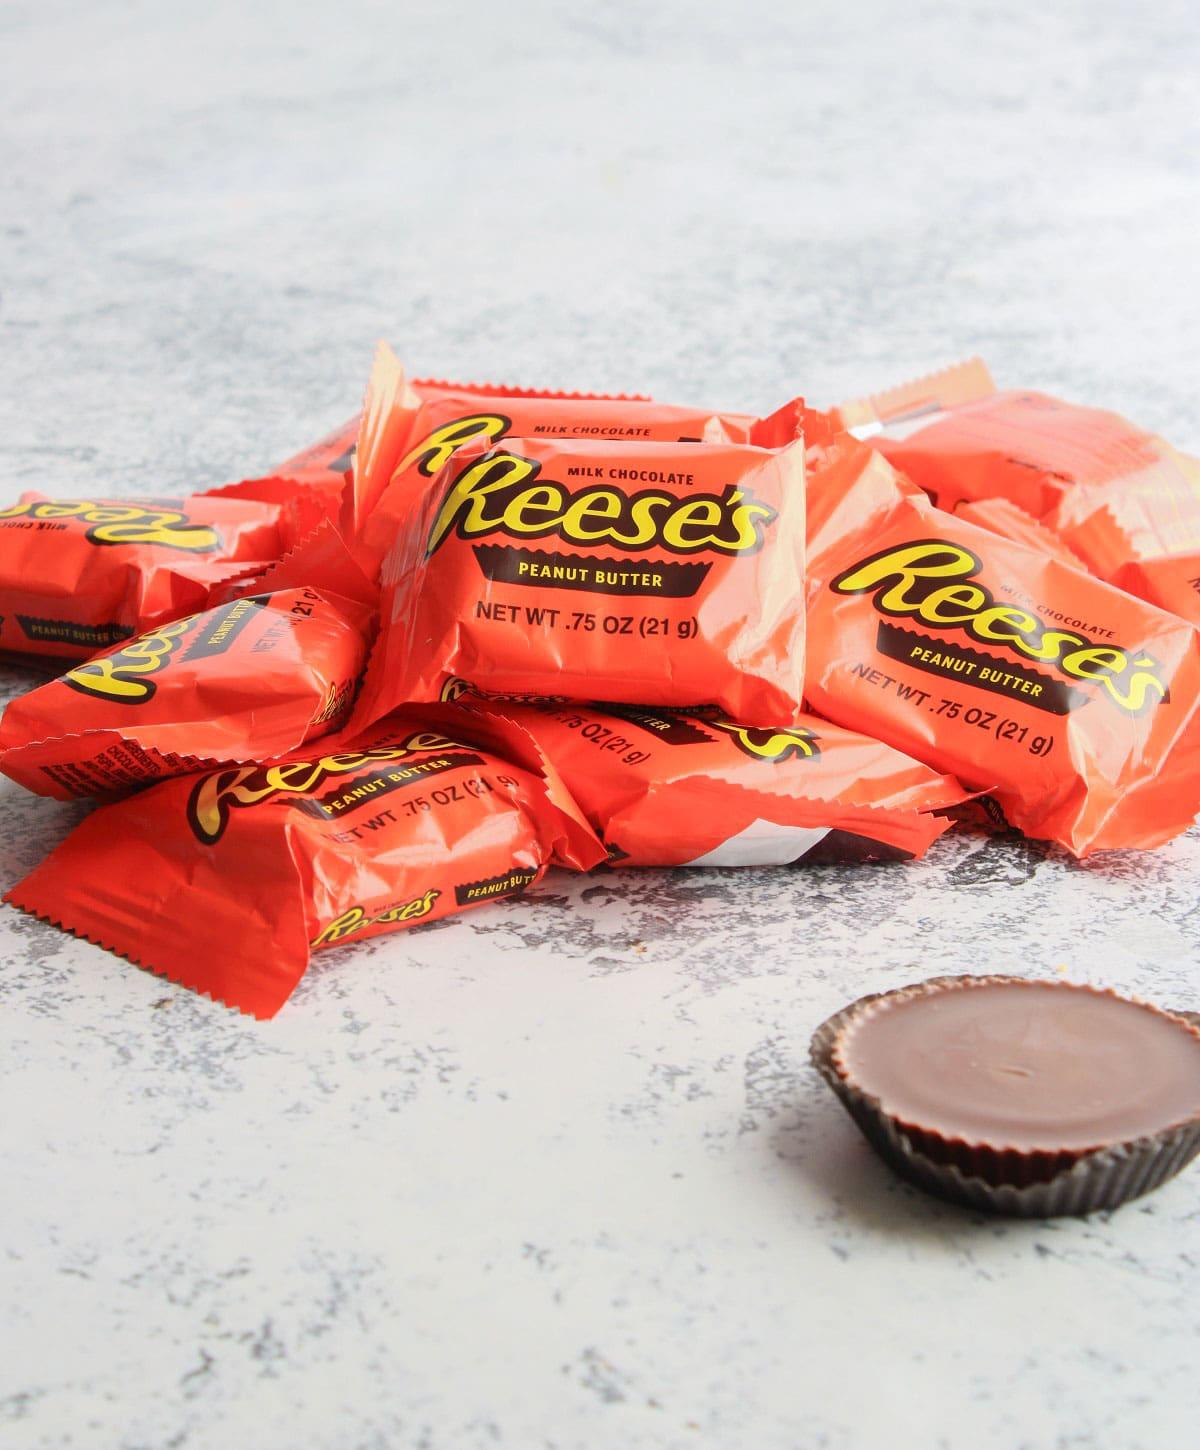 A scattered pile of Reese